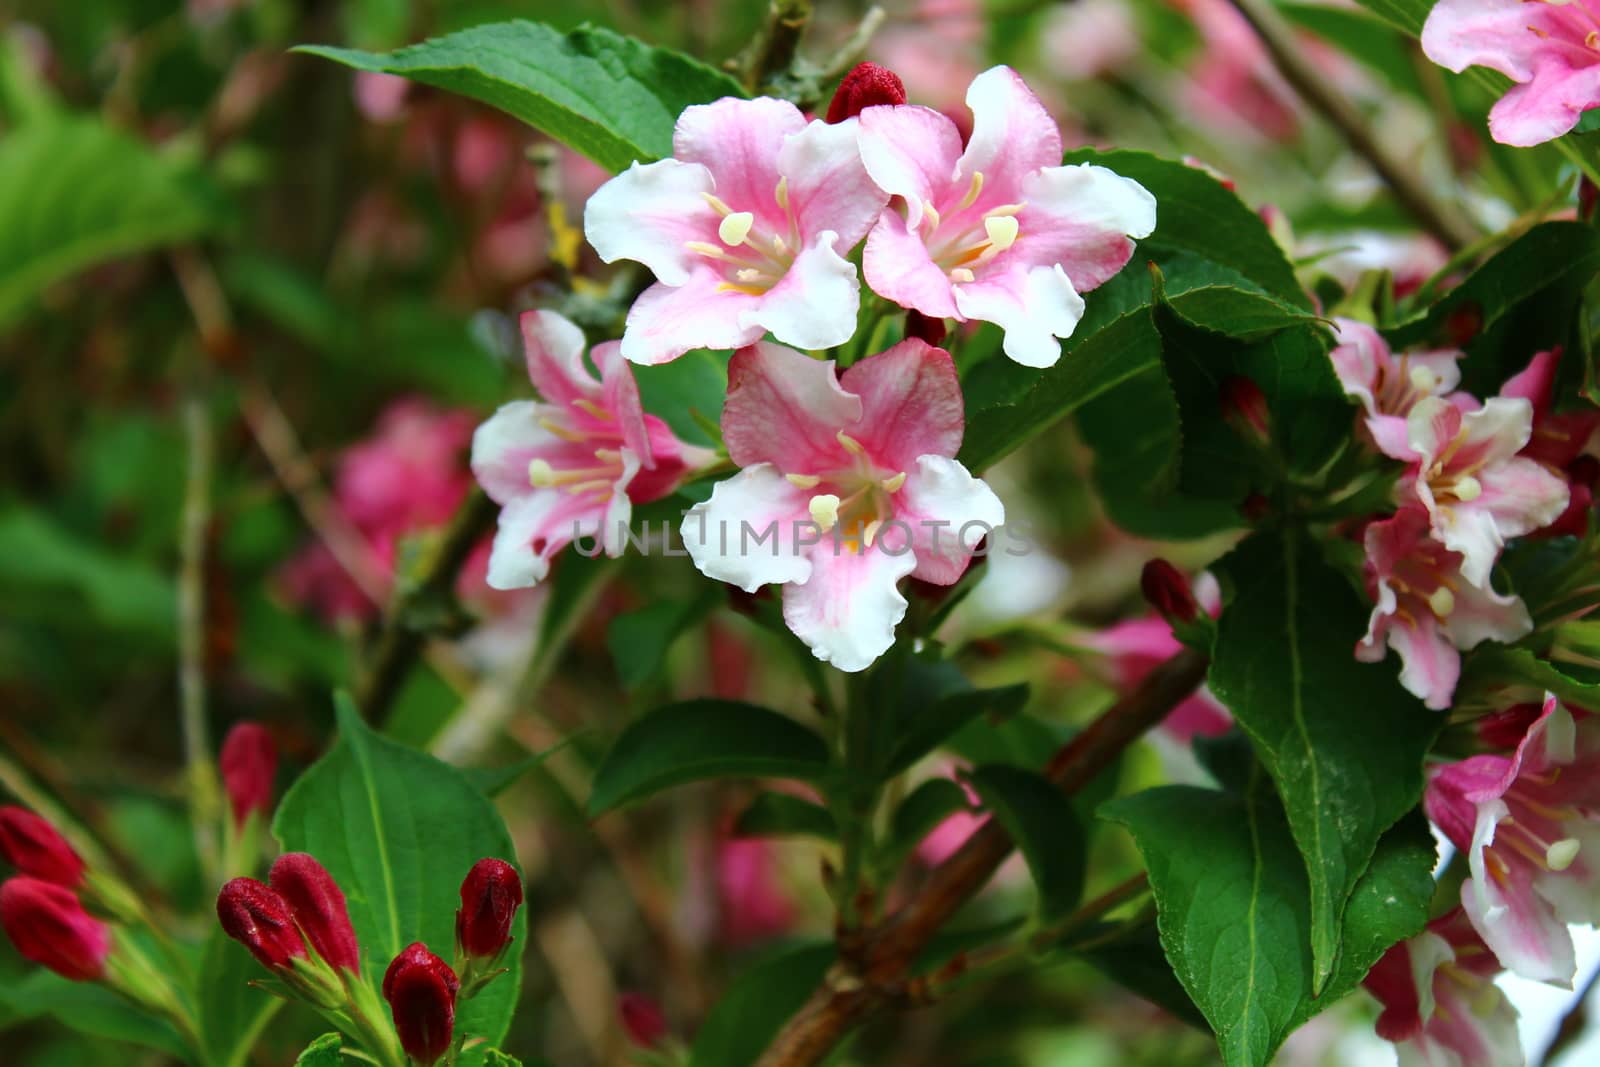 The picture shows beautiful weigela in the garden.